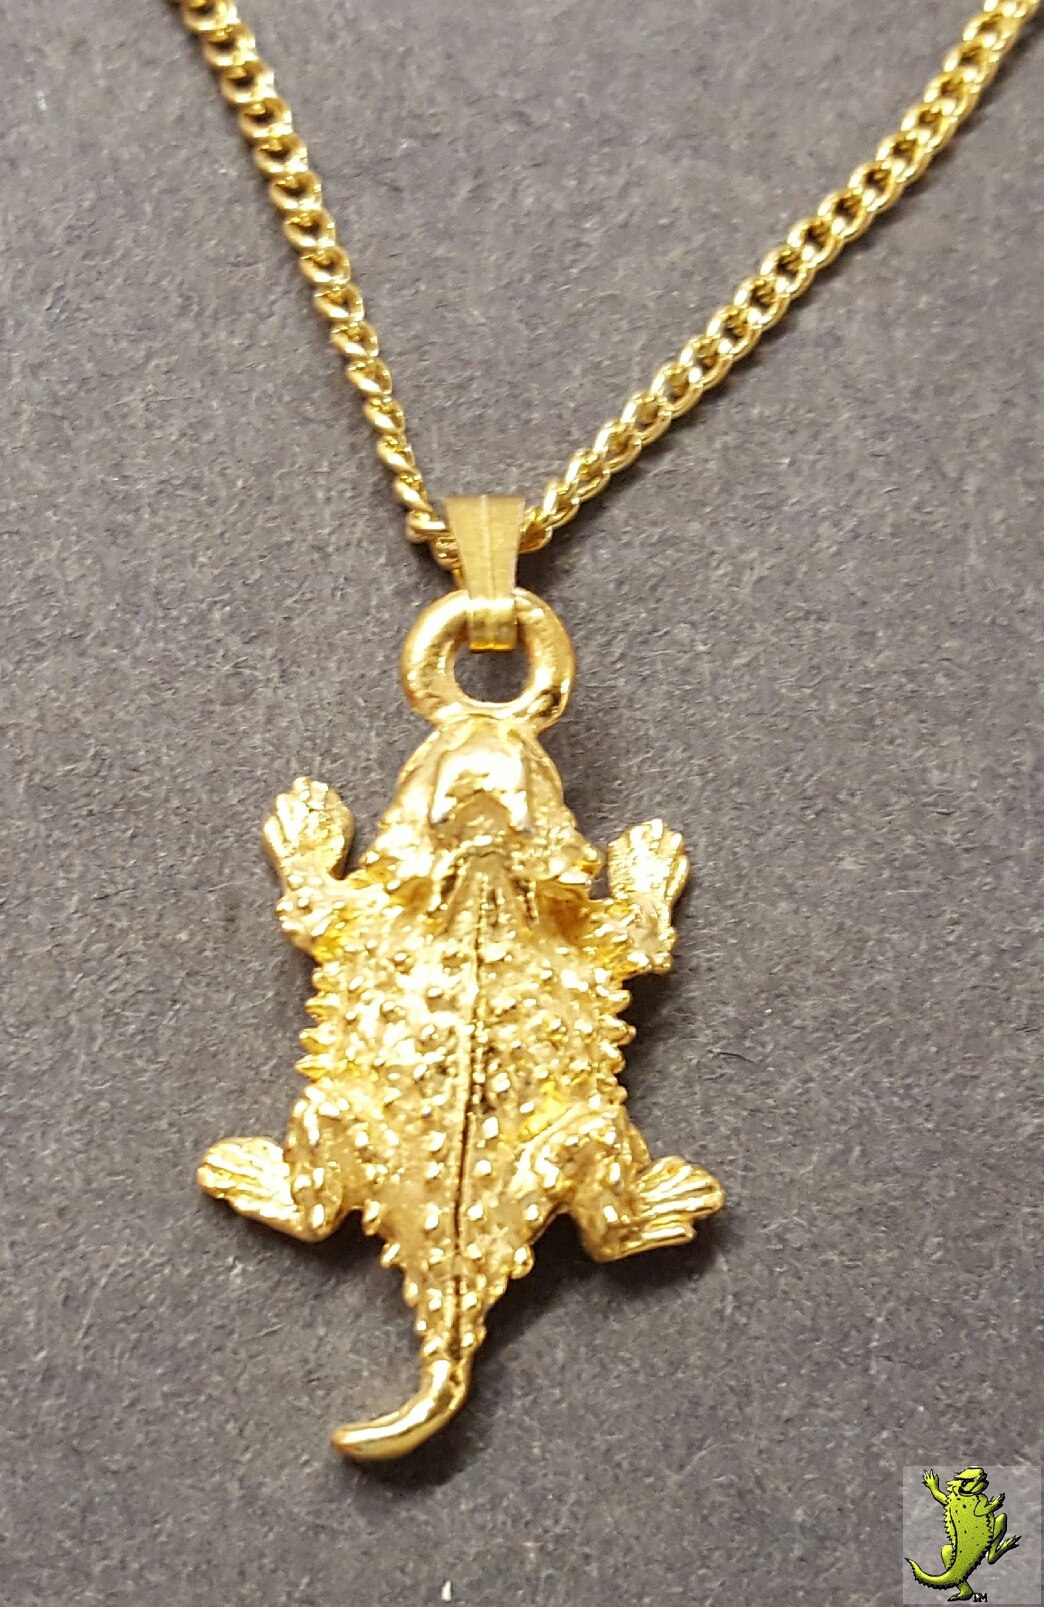 Horny Toad necklace - 1"